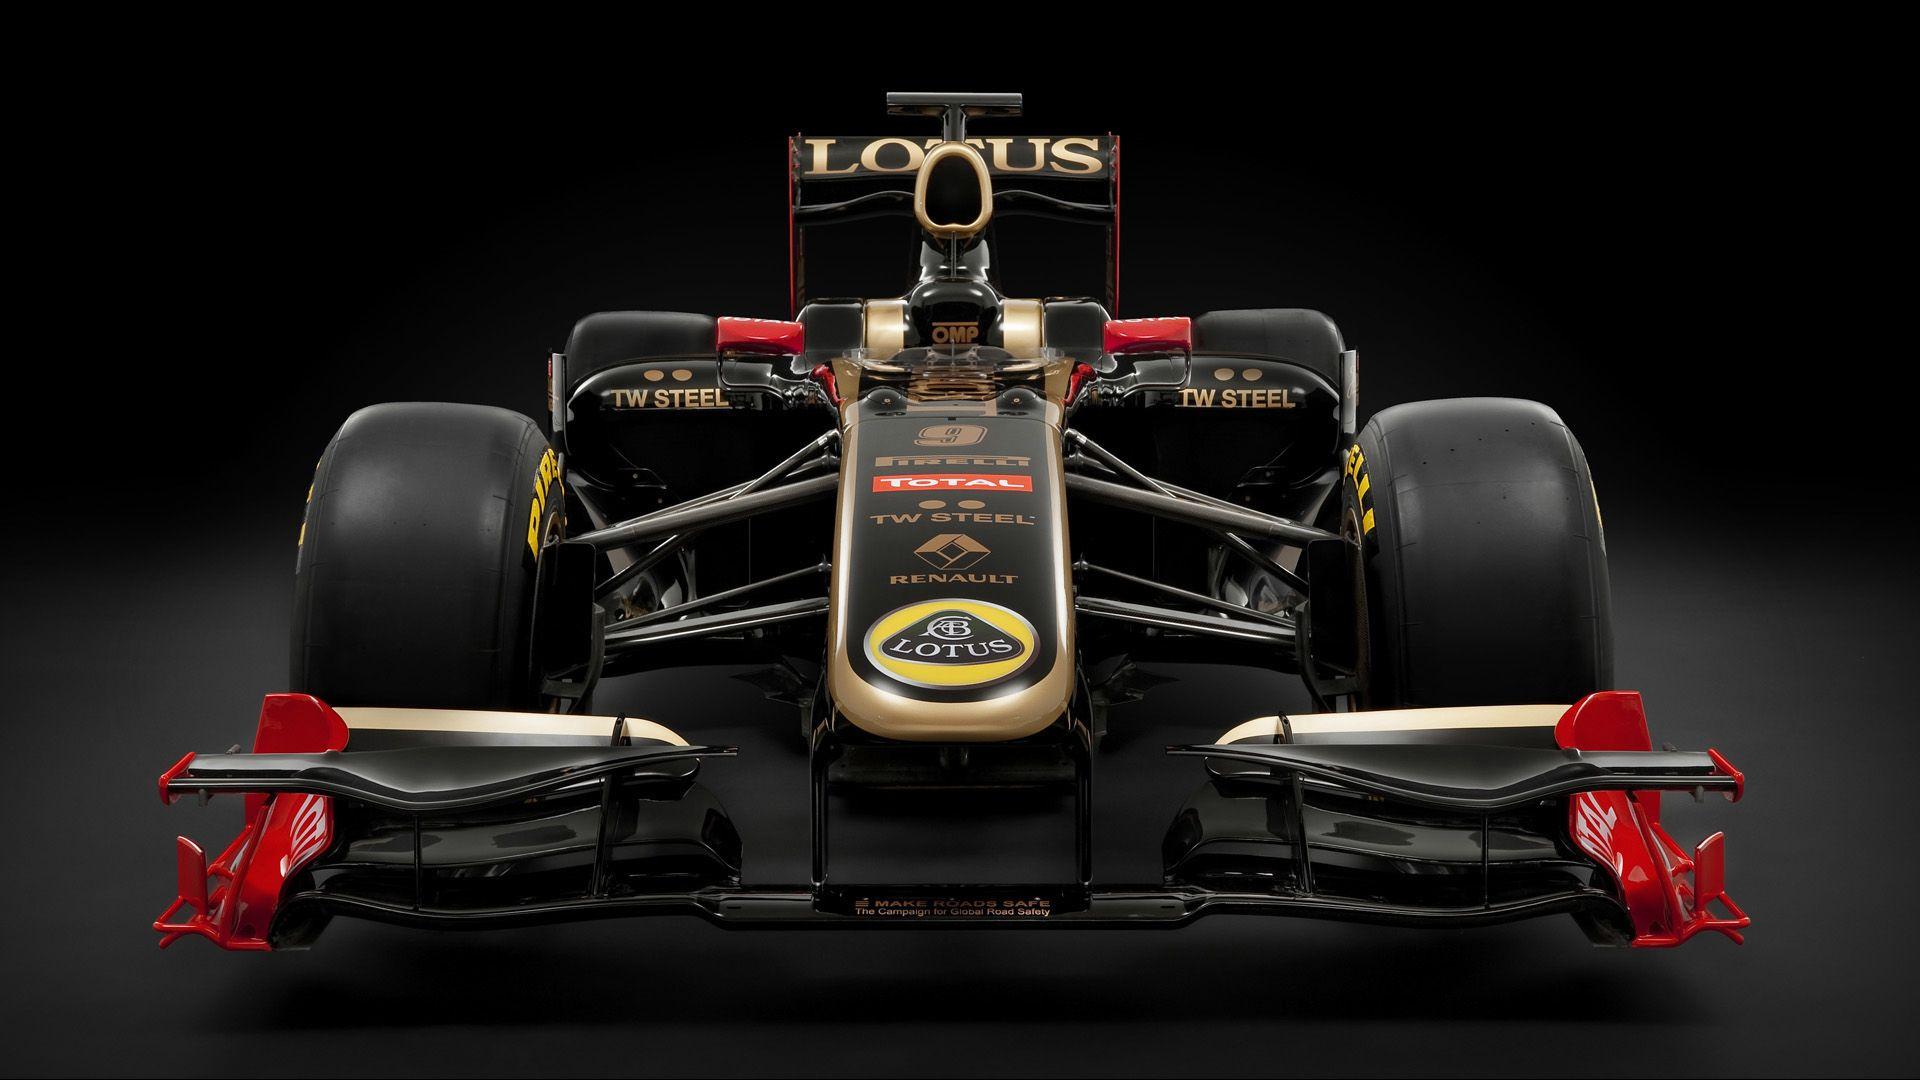 Lotus F1 Wallpapers Top Free Lotus F1 Backgrounds Wallpaperaccess